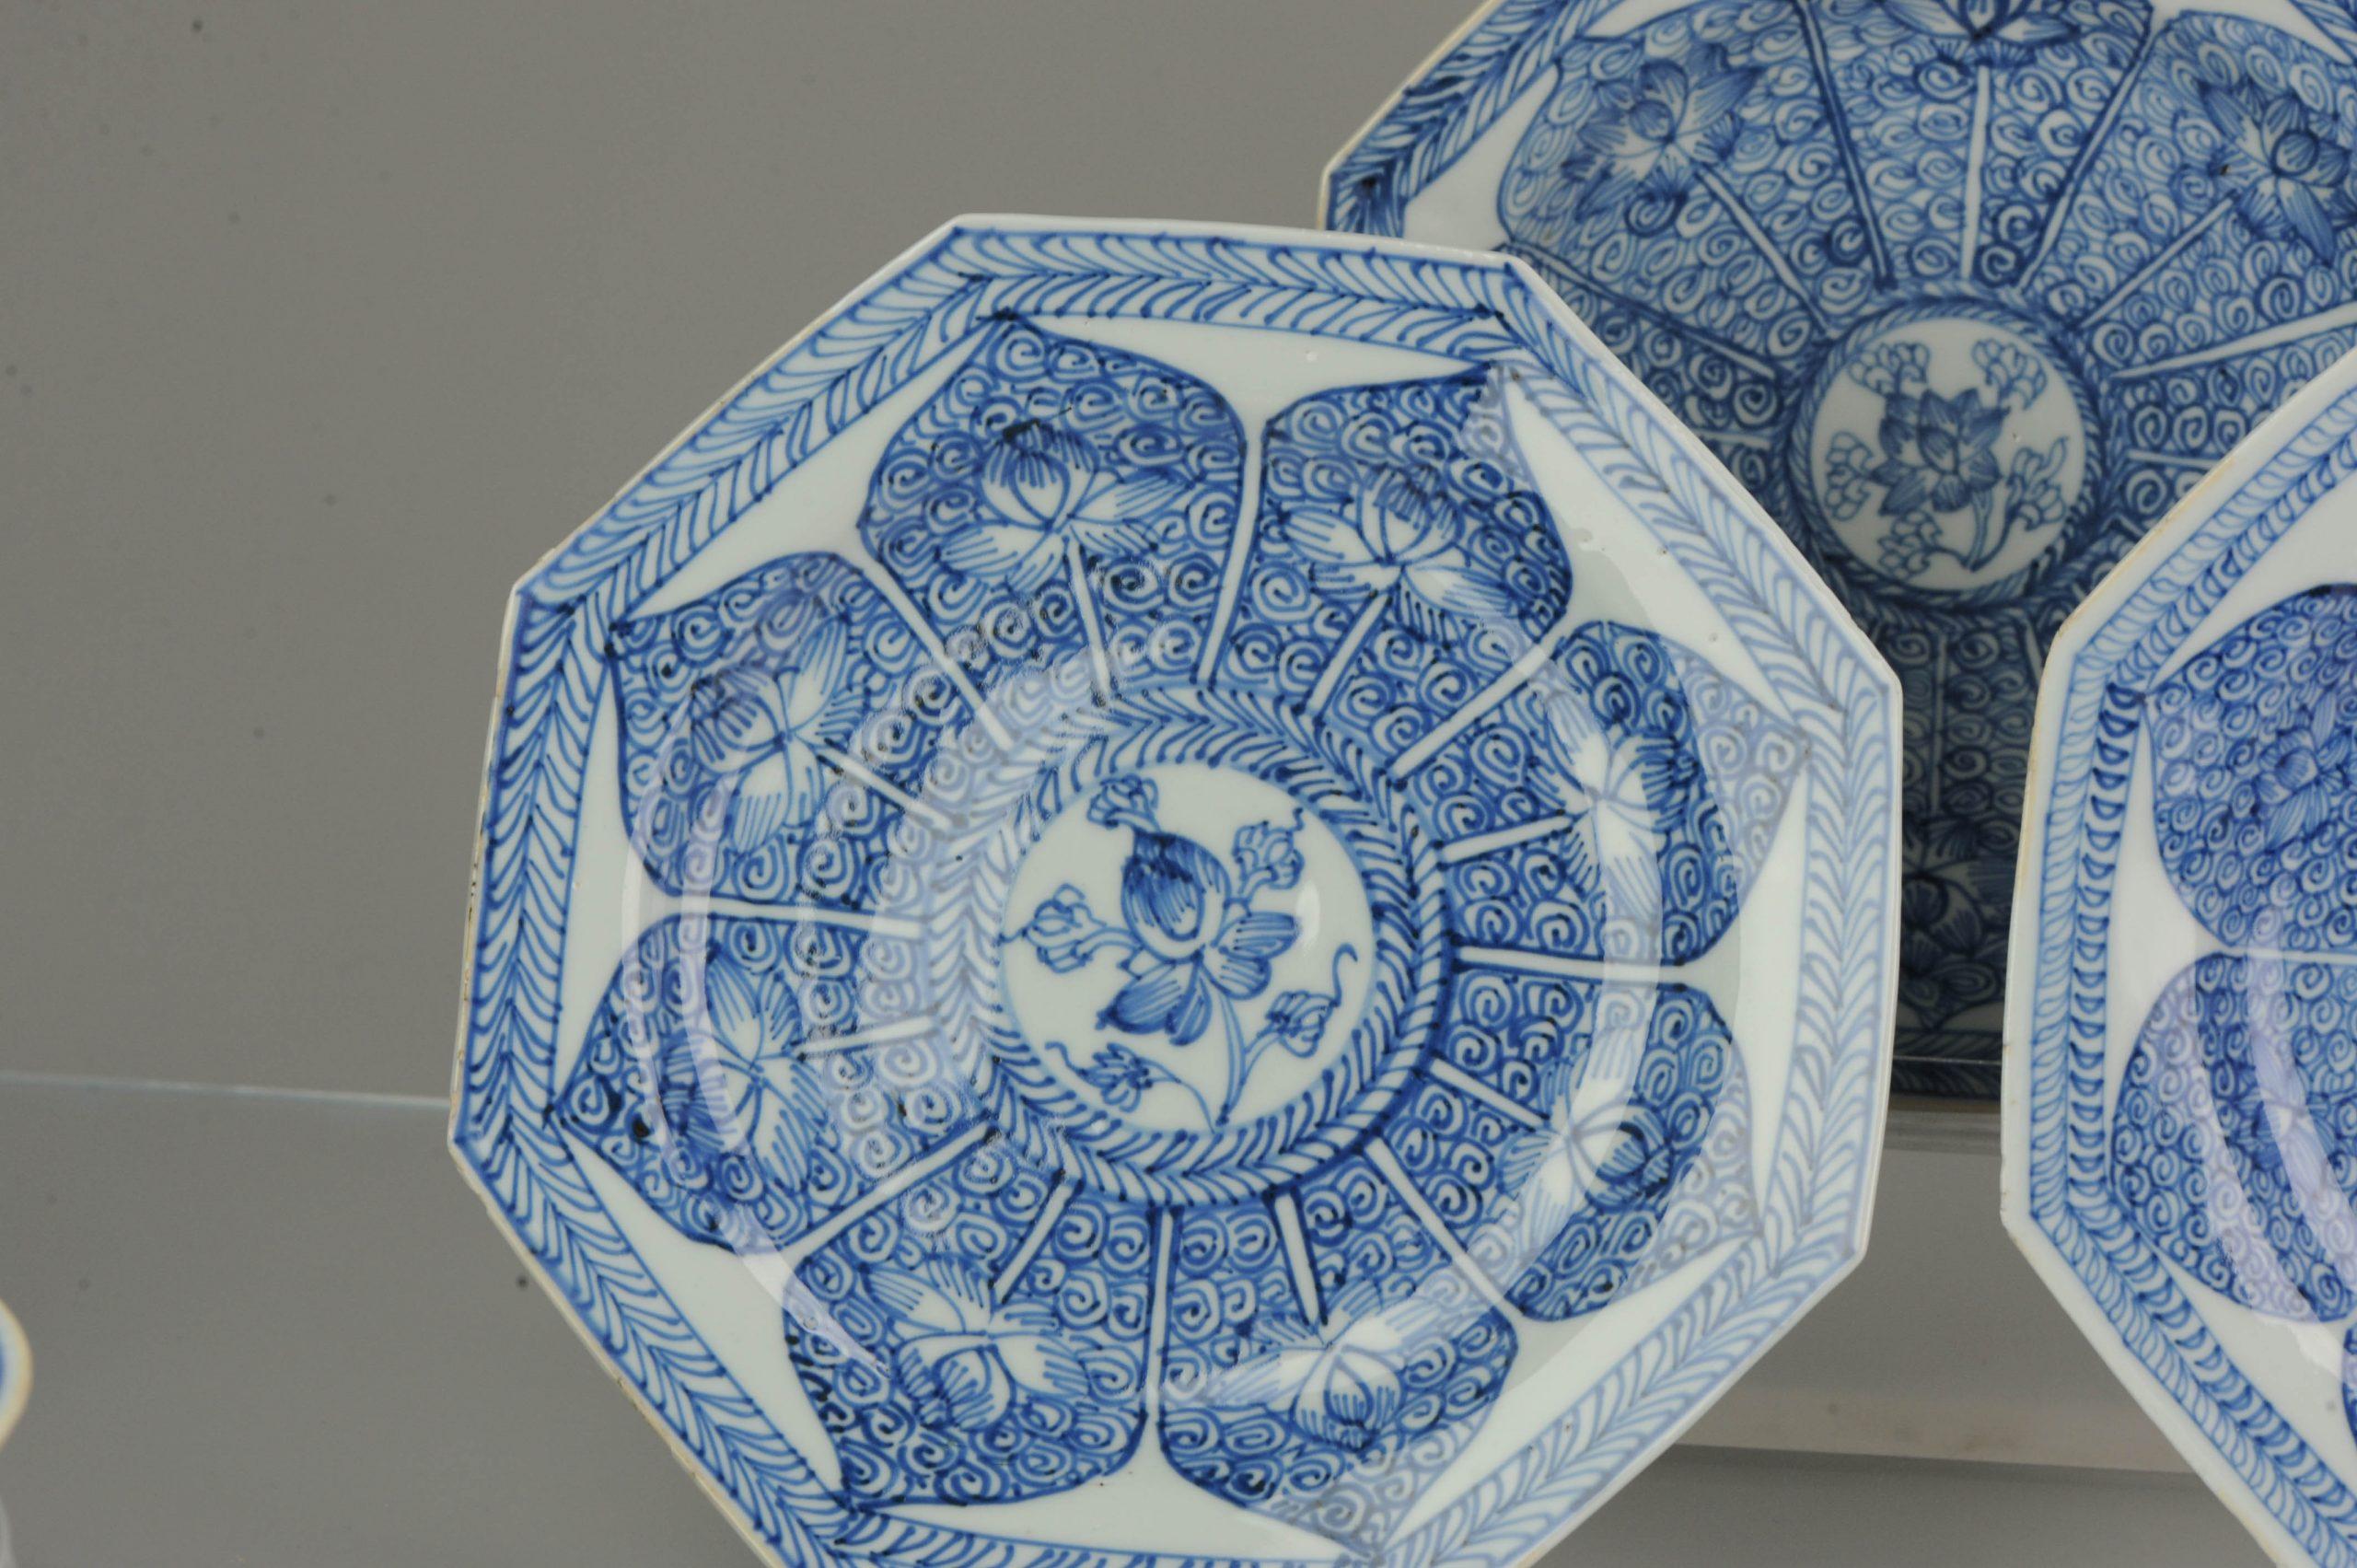 A very nicely decorated typical lotus flower plate for the SE Asian market. Top quality paintwork. 6 pieces
A dish with similar painted swirled lotus petals is pictured in 